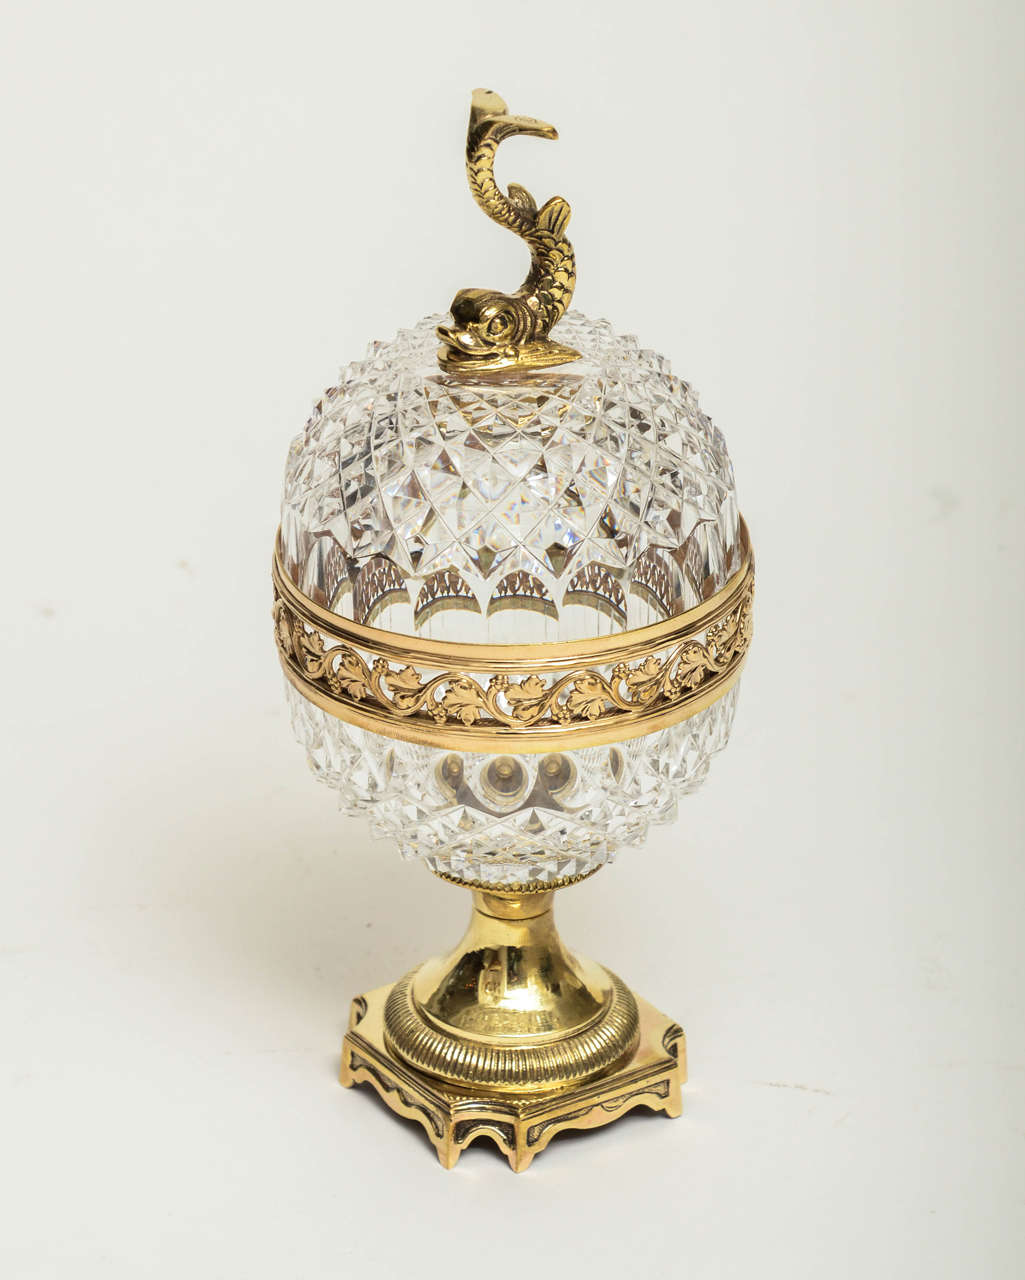 Facet cut crystal egg form box with bronze details.